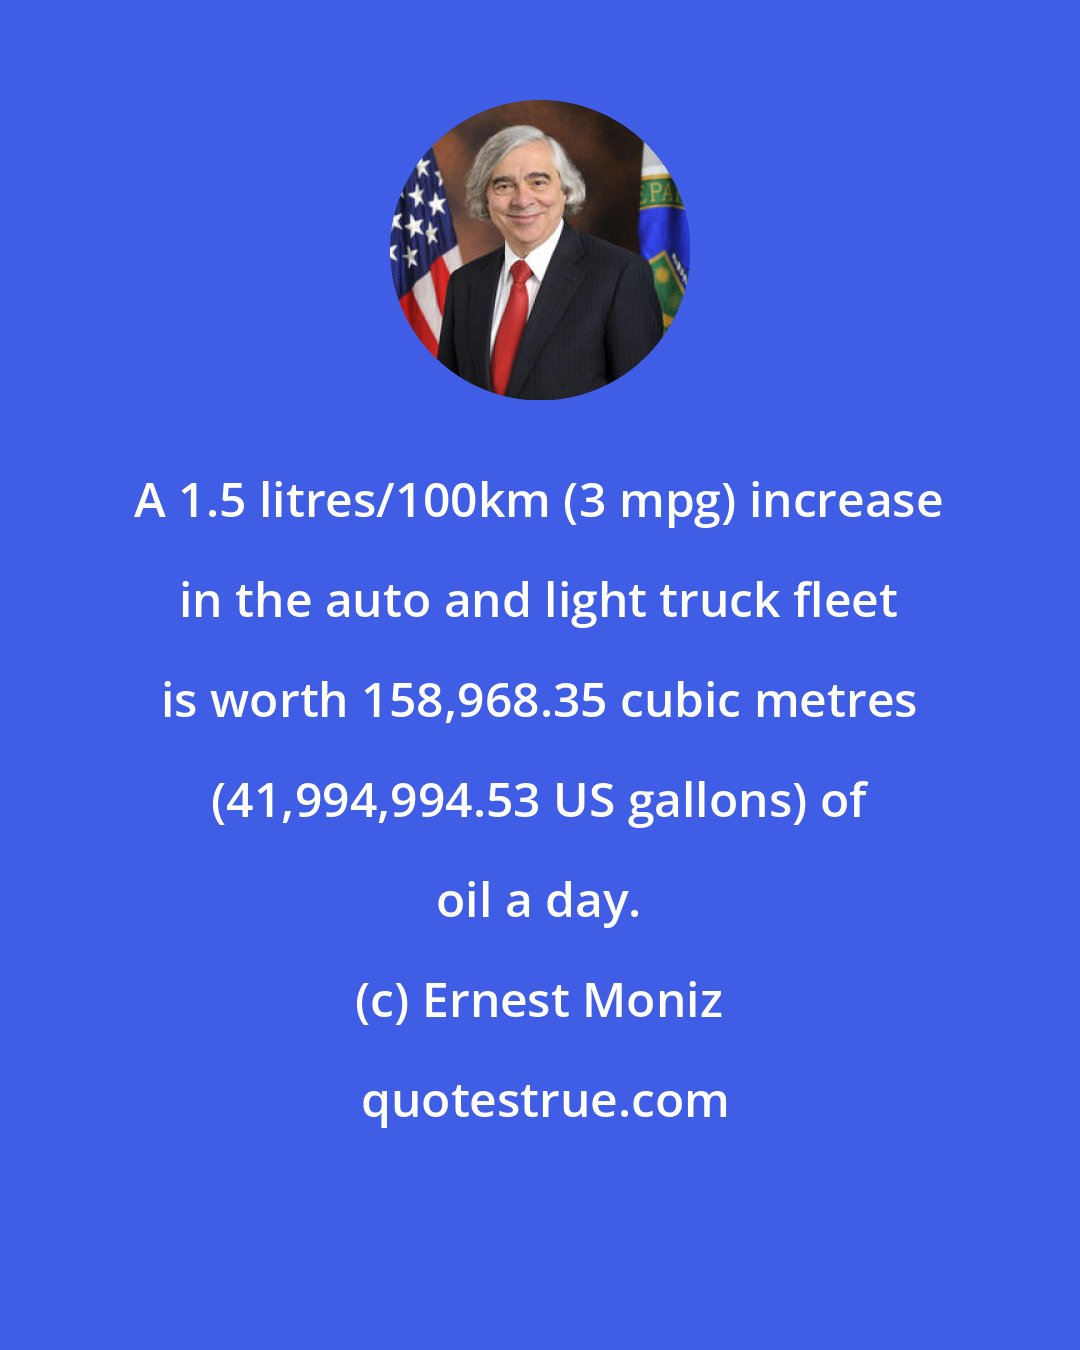 Ernest Moniz: A 1.5 litres/100km (3 mpg) increase in the auto and light truck fleet is worth 158,968.35 cubic metres (41,994,994.53 US gallons) of oil a day.